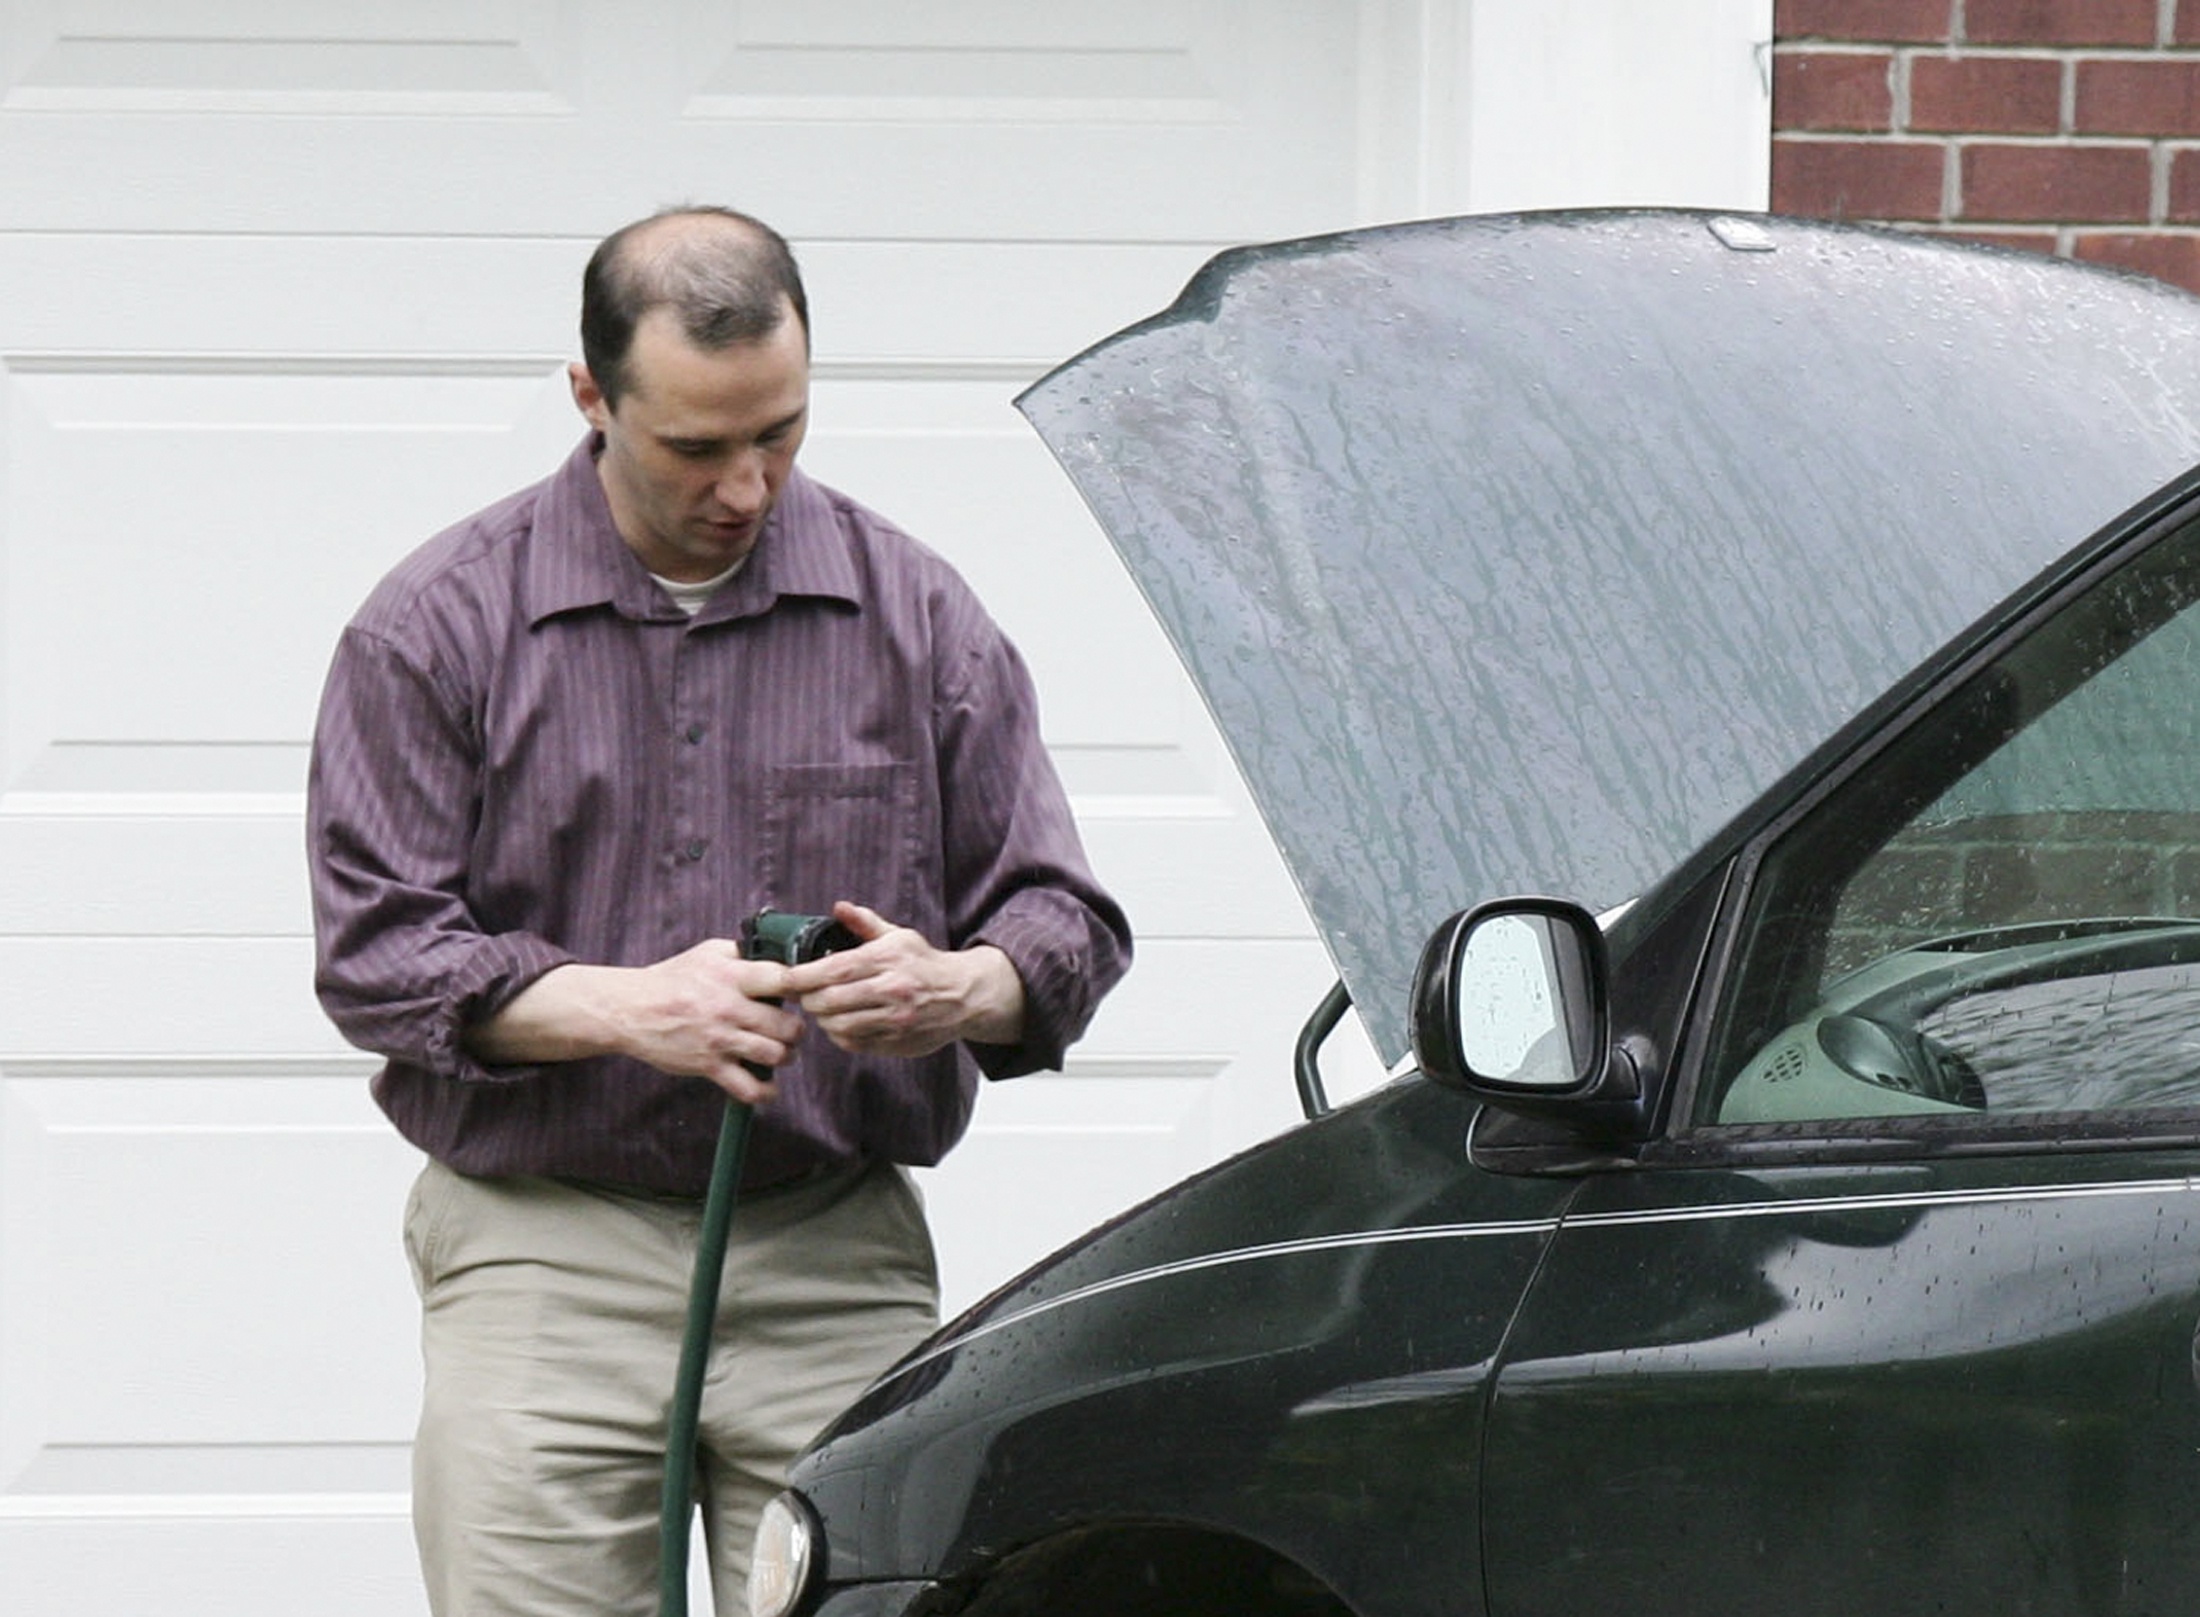 Everett Dutschke works on his mini-van in his driveway in Tupelo, Mississippi. Photo: Reuters